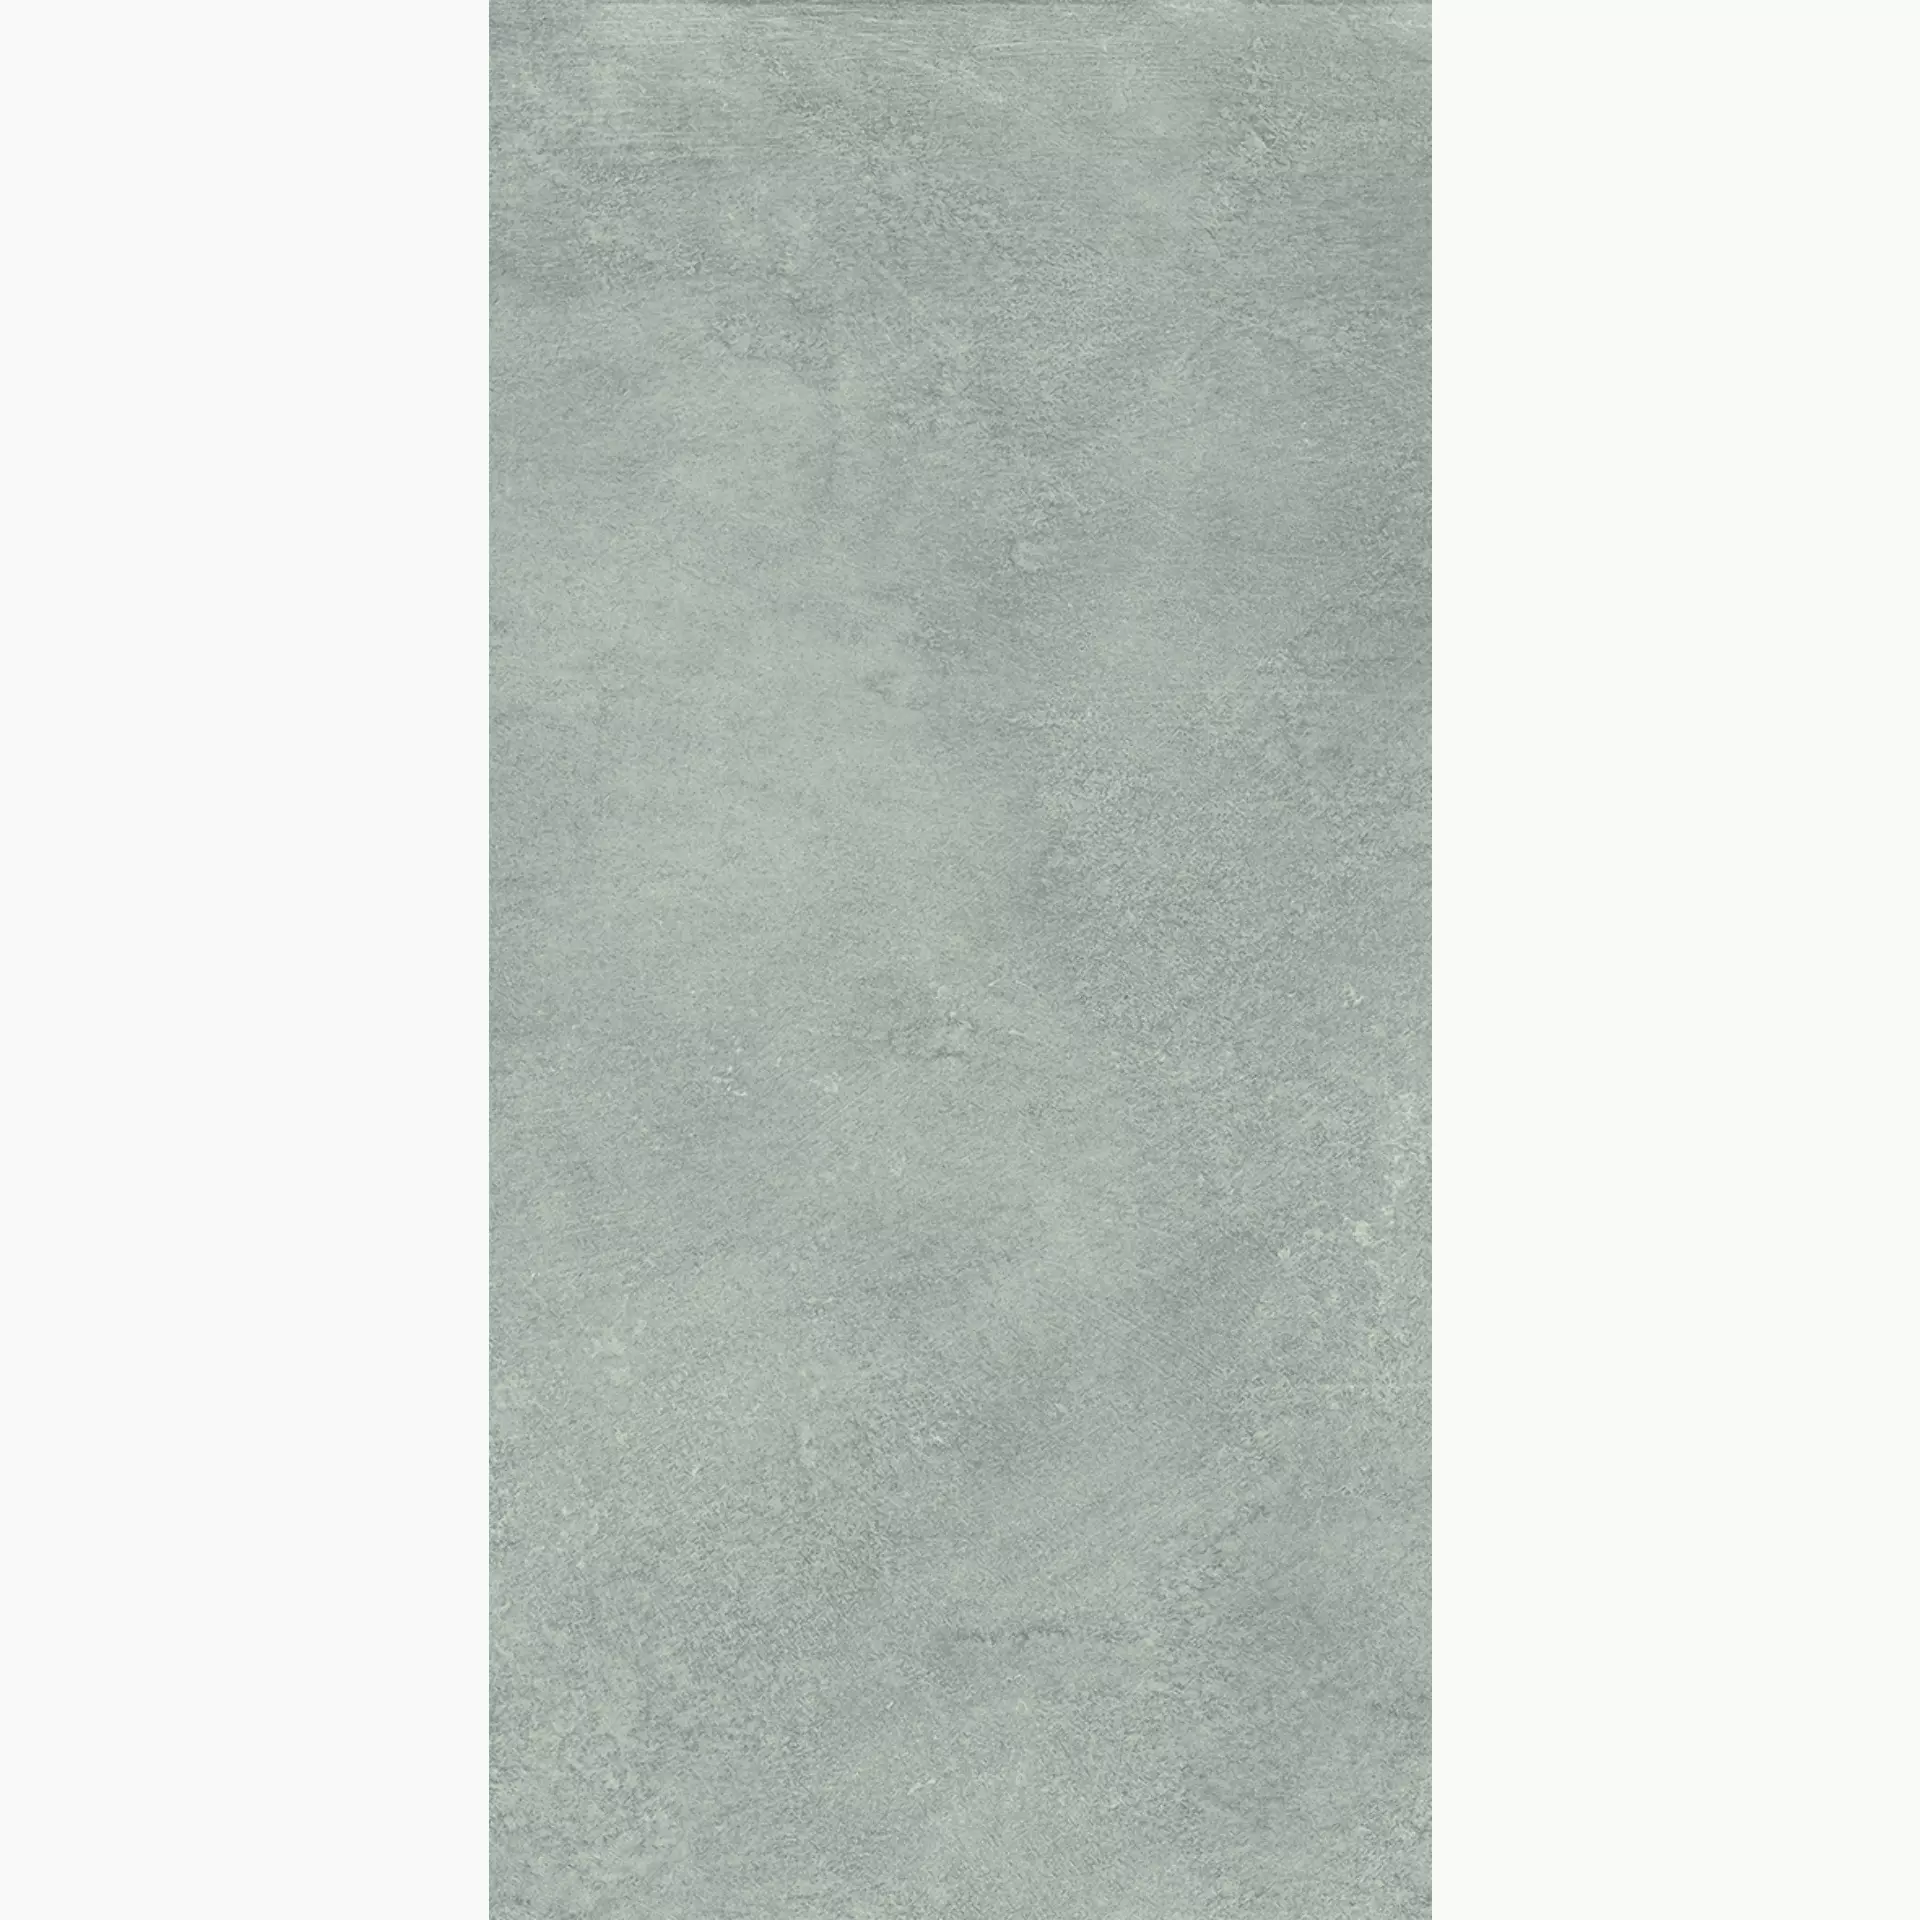 Provenza Karman Cenere Naturale ED9Y 30x60cm rectified 9,5mm